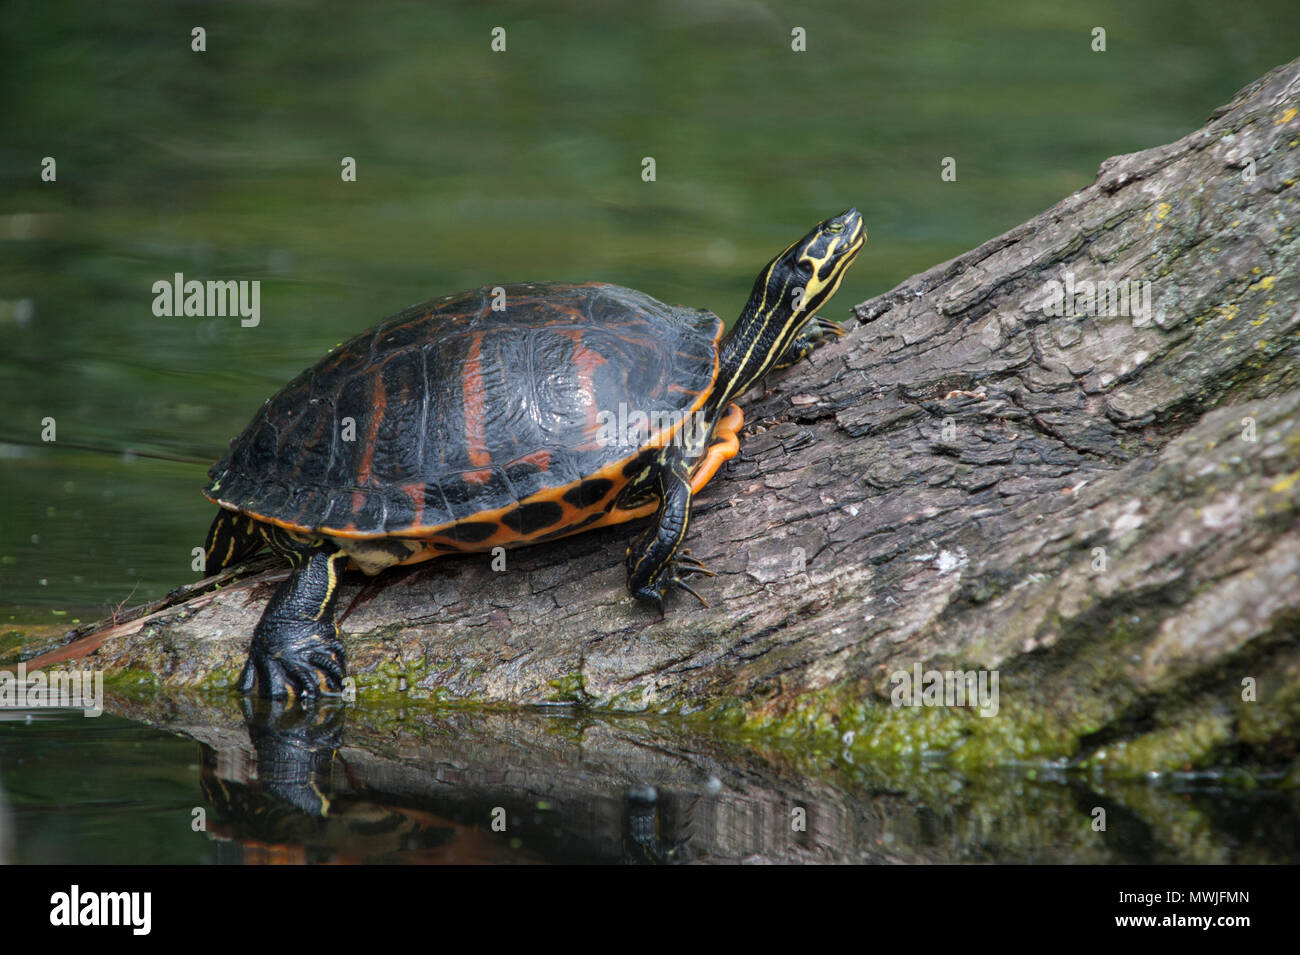 male Western Painted Turtle, (Chrysemys picta), non-native species released into a lake in Regents Park, London, United Kingdom Stock Photo